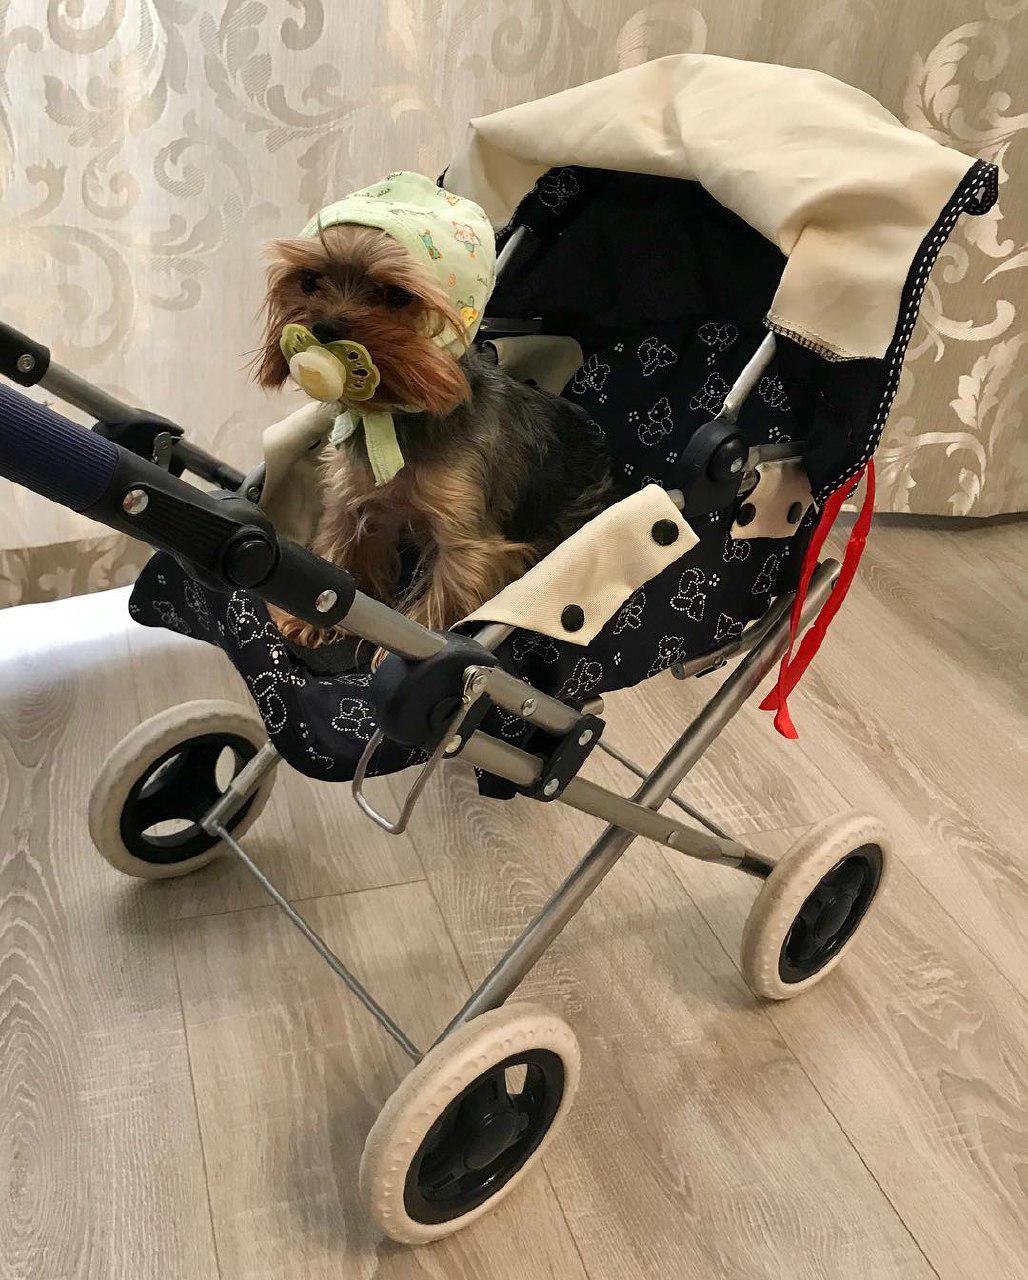 A Yorkshire Terrier in a baby outfit while sitting inside the stroller